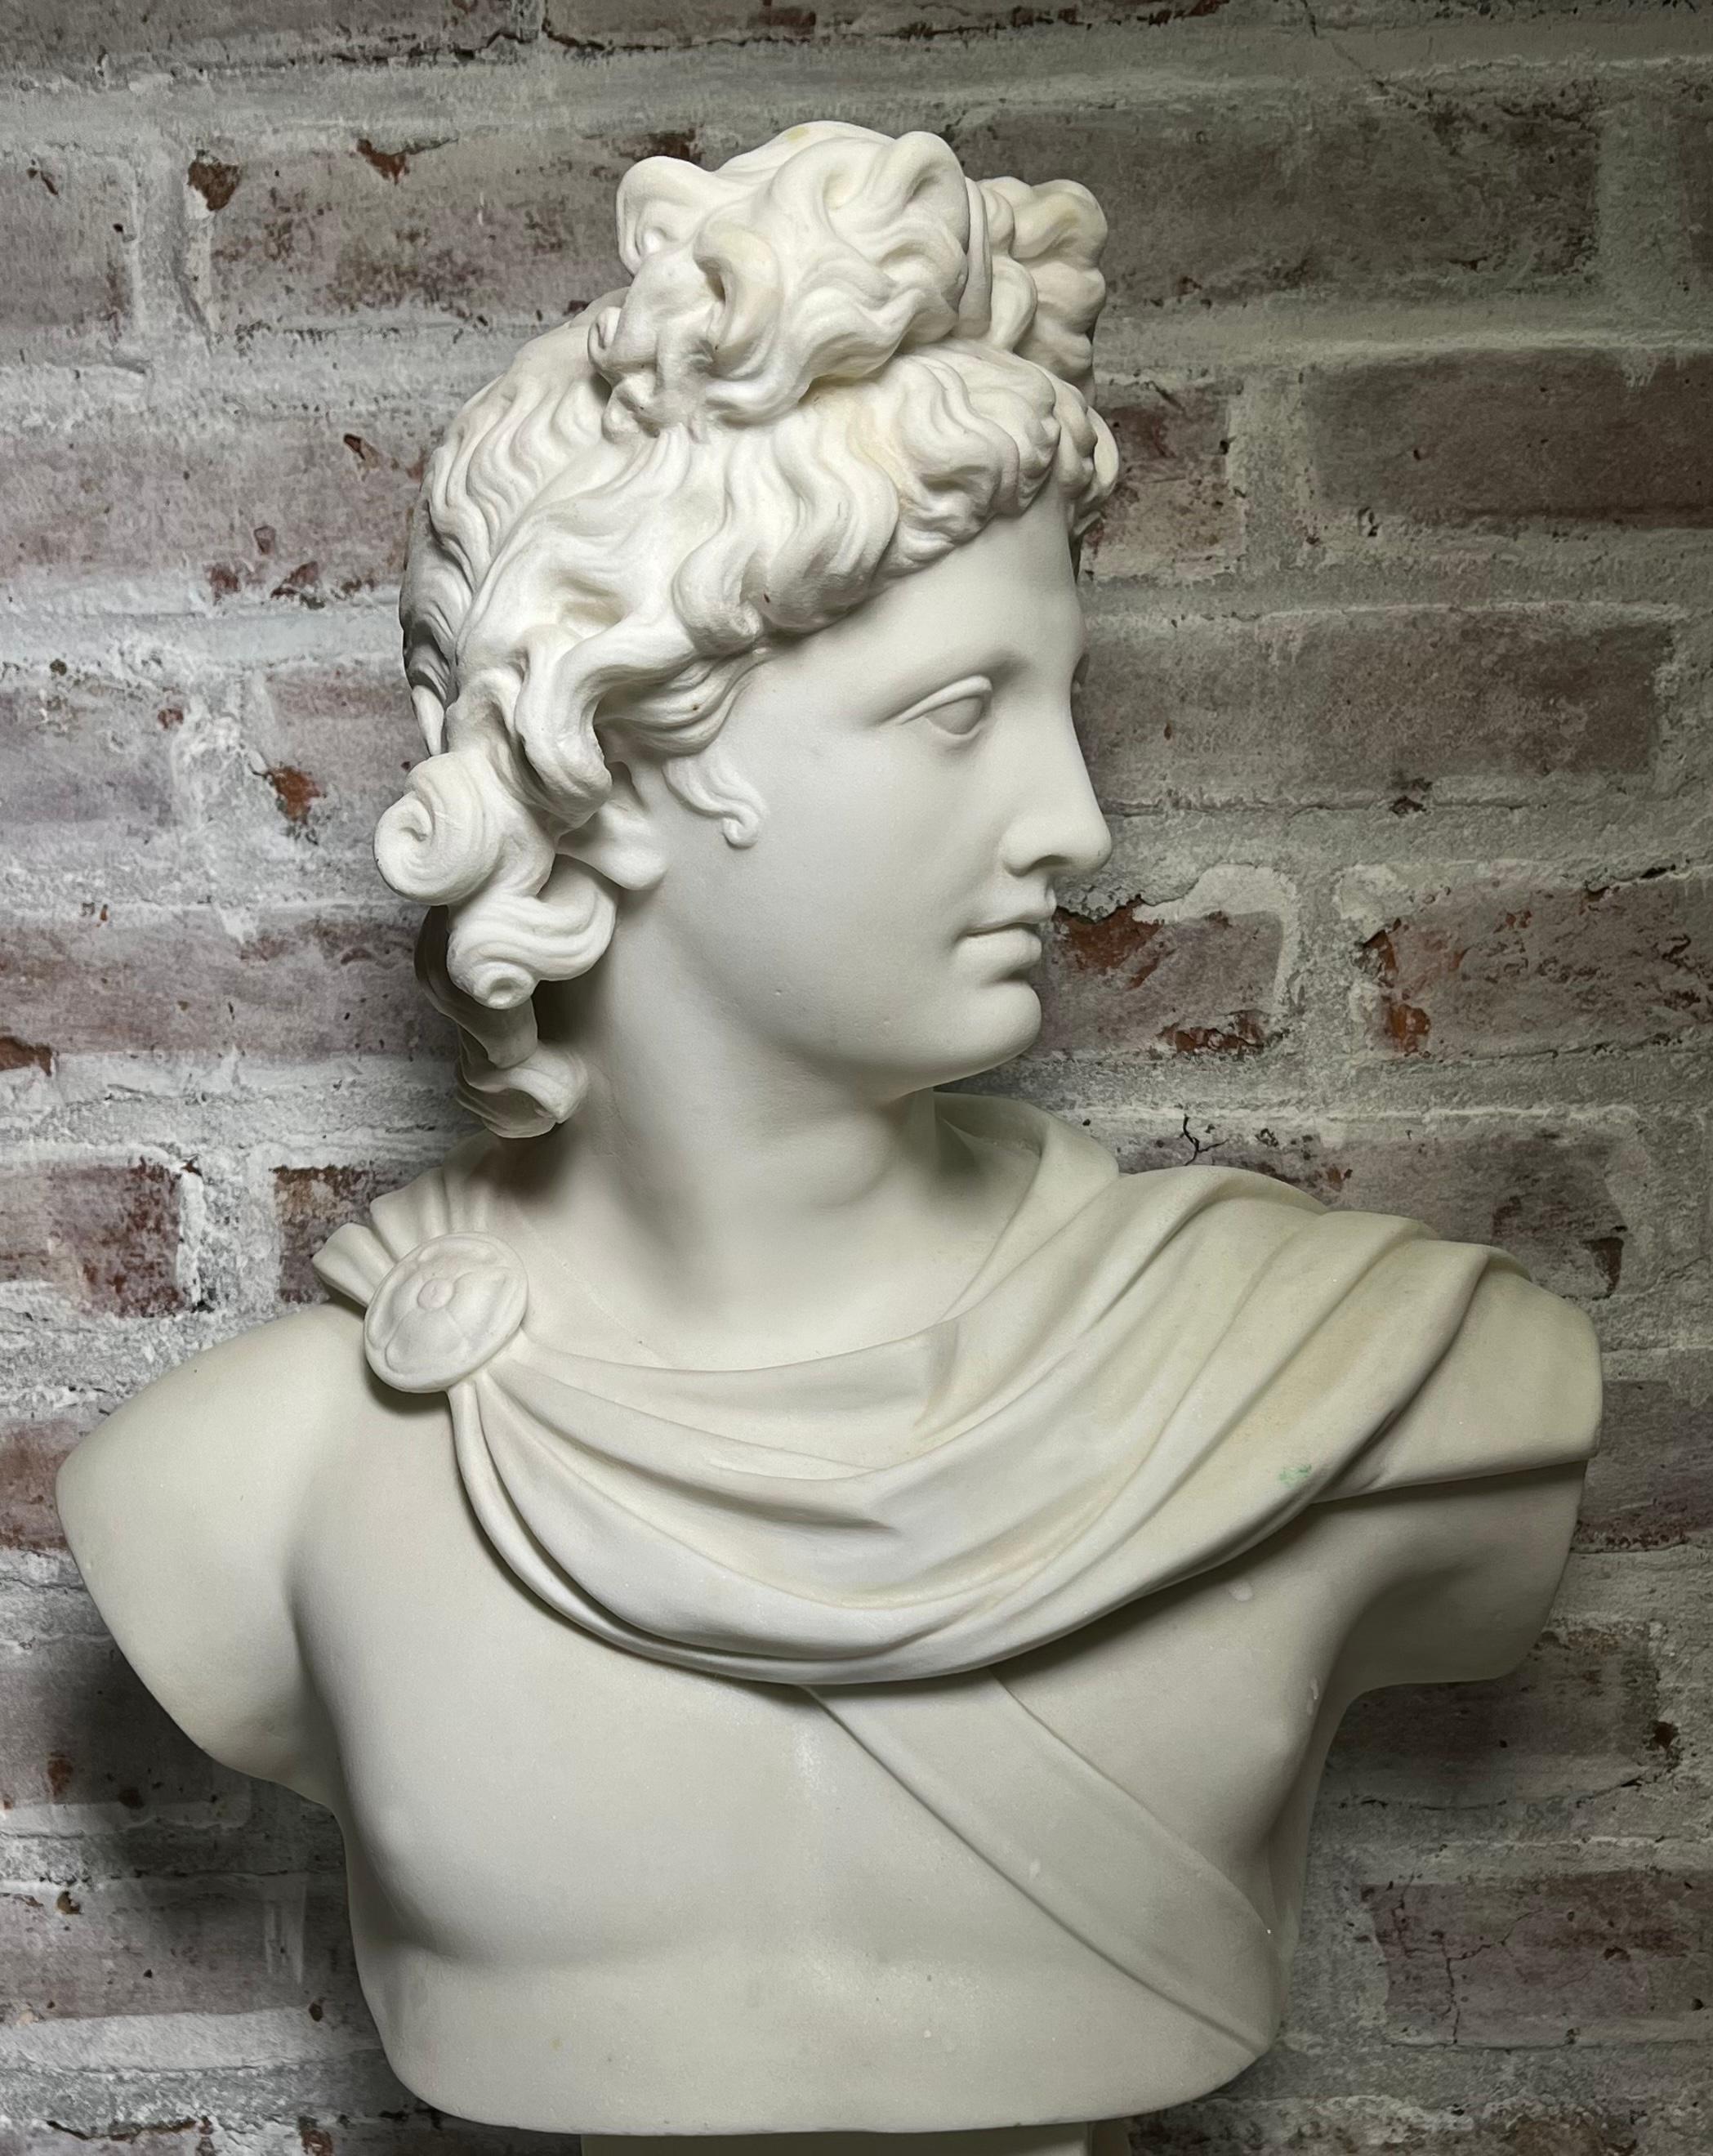 Large 19th Century Antique Marble Bust of Apollo of Belvedere - Academic Sculpture by Pietro Barzanti